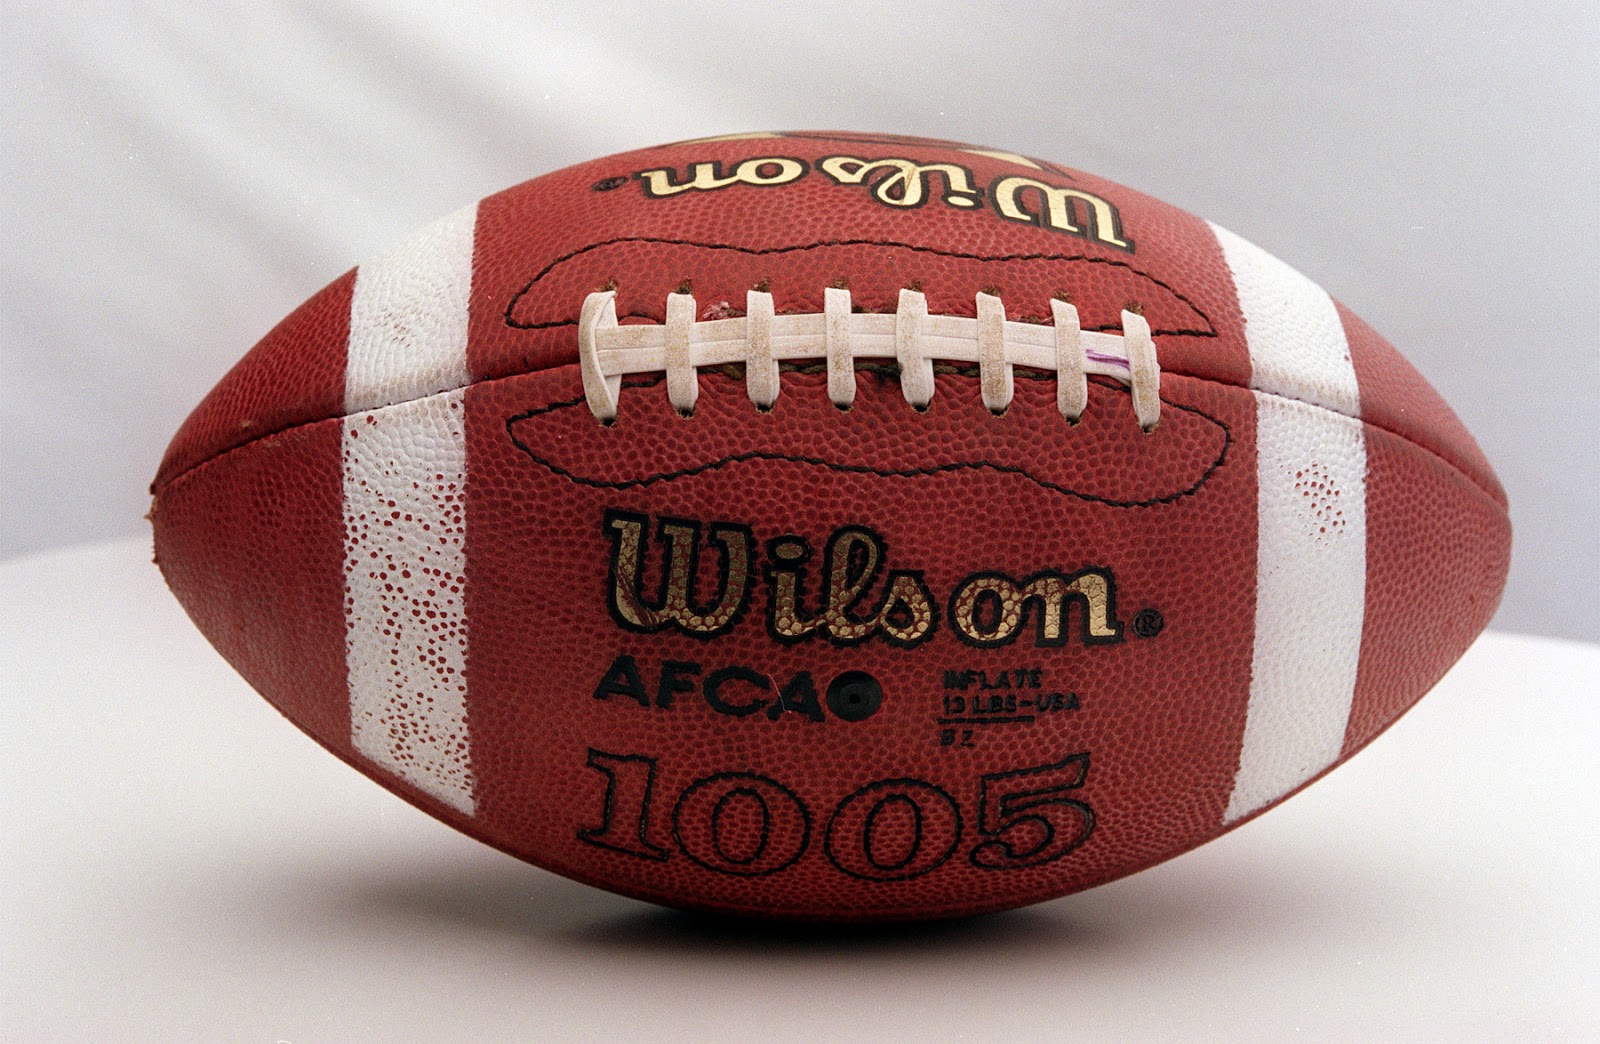 All photos gallery: pictures of a football, picture of football.